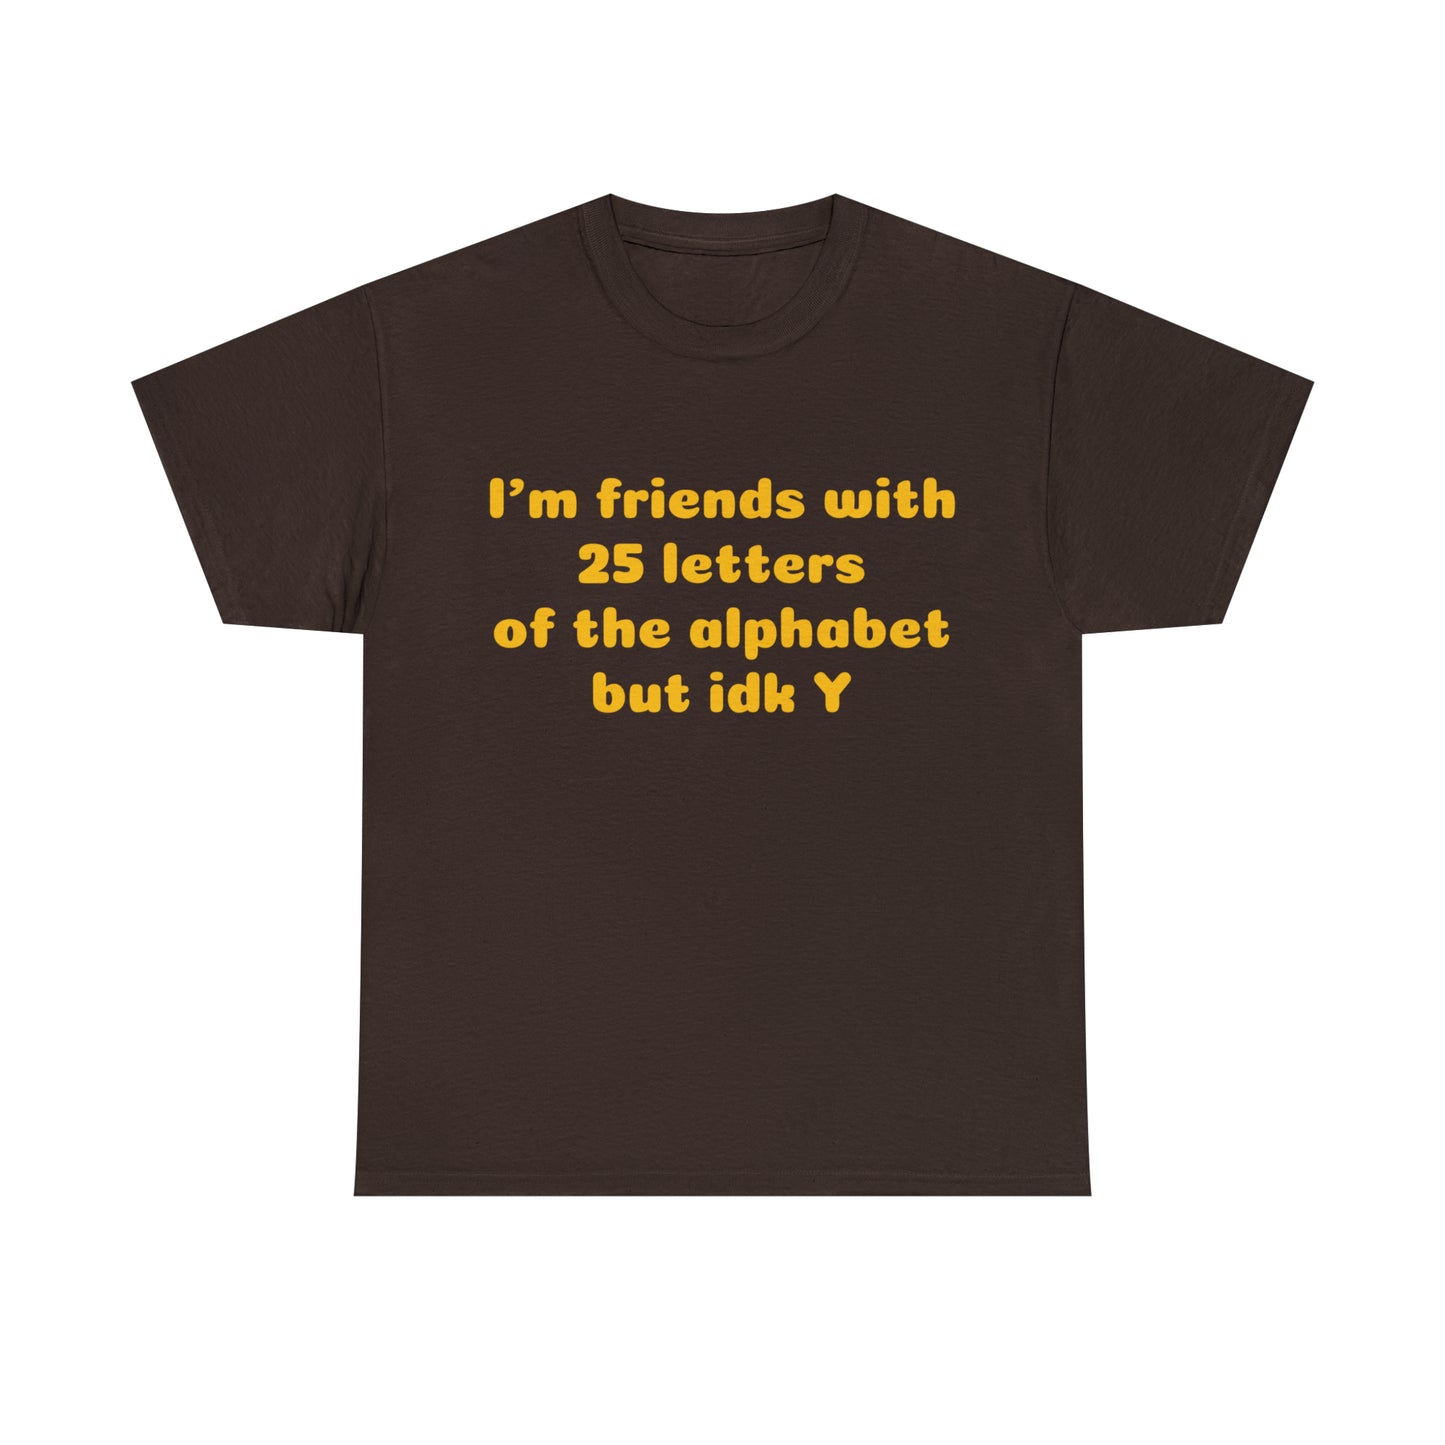 Custom Parody T-shirt, Im friends with 25 letters of the alphabet, but idk Y shirt design